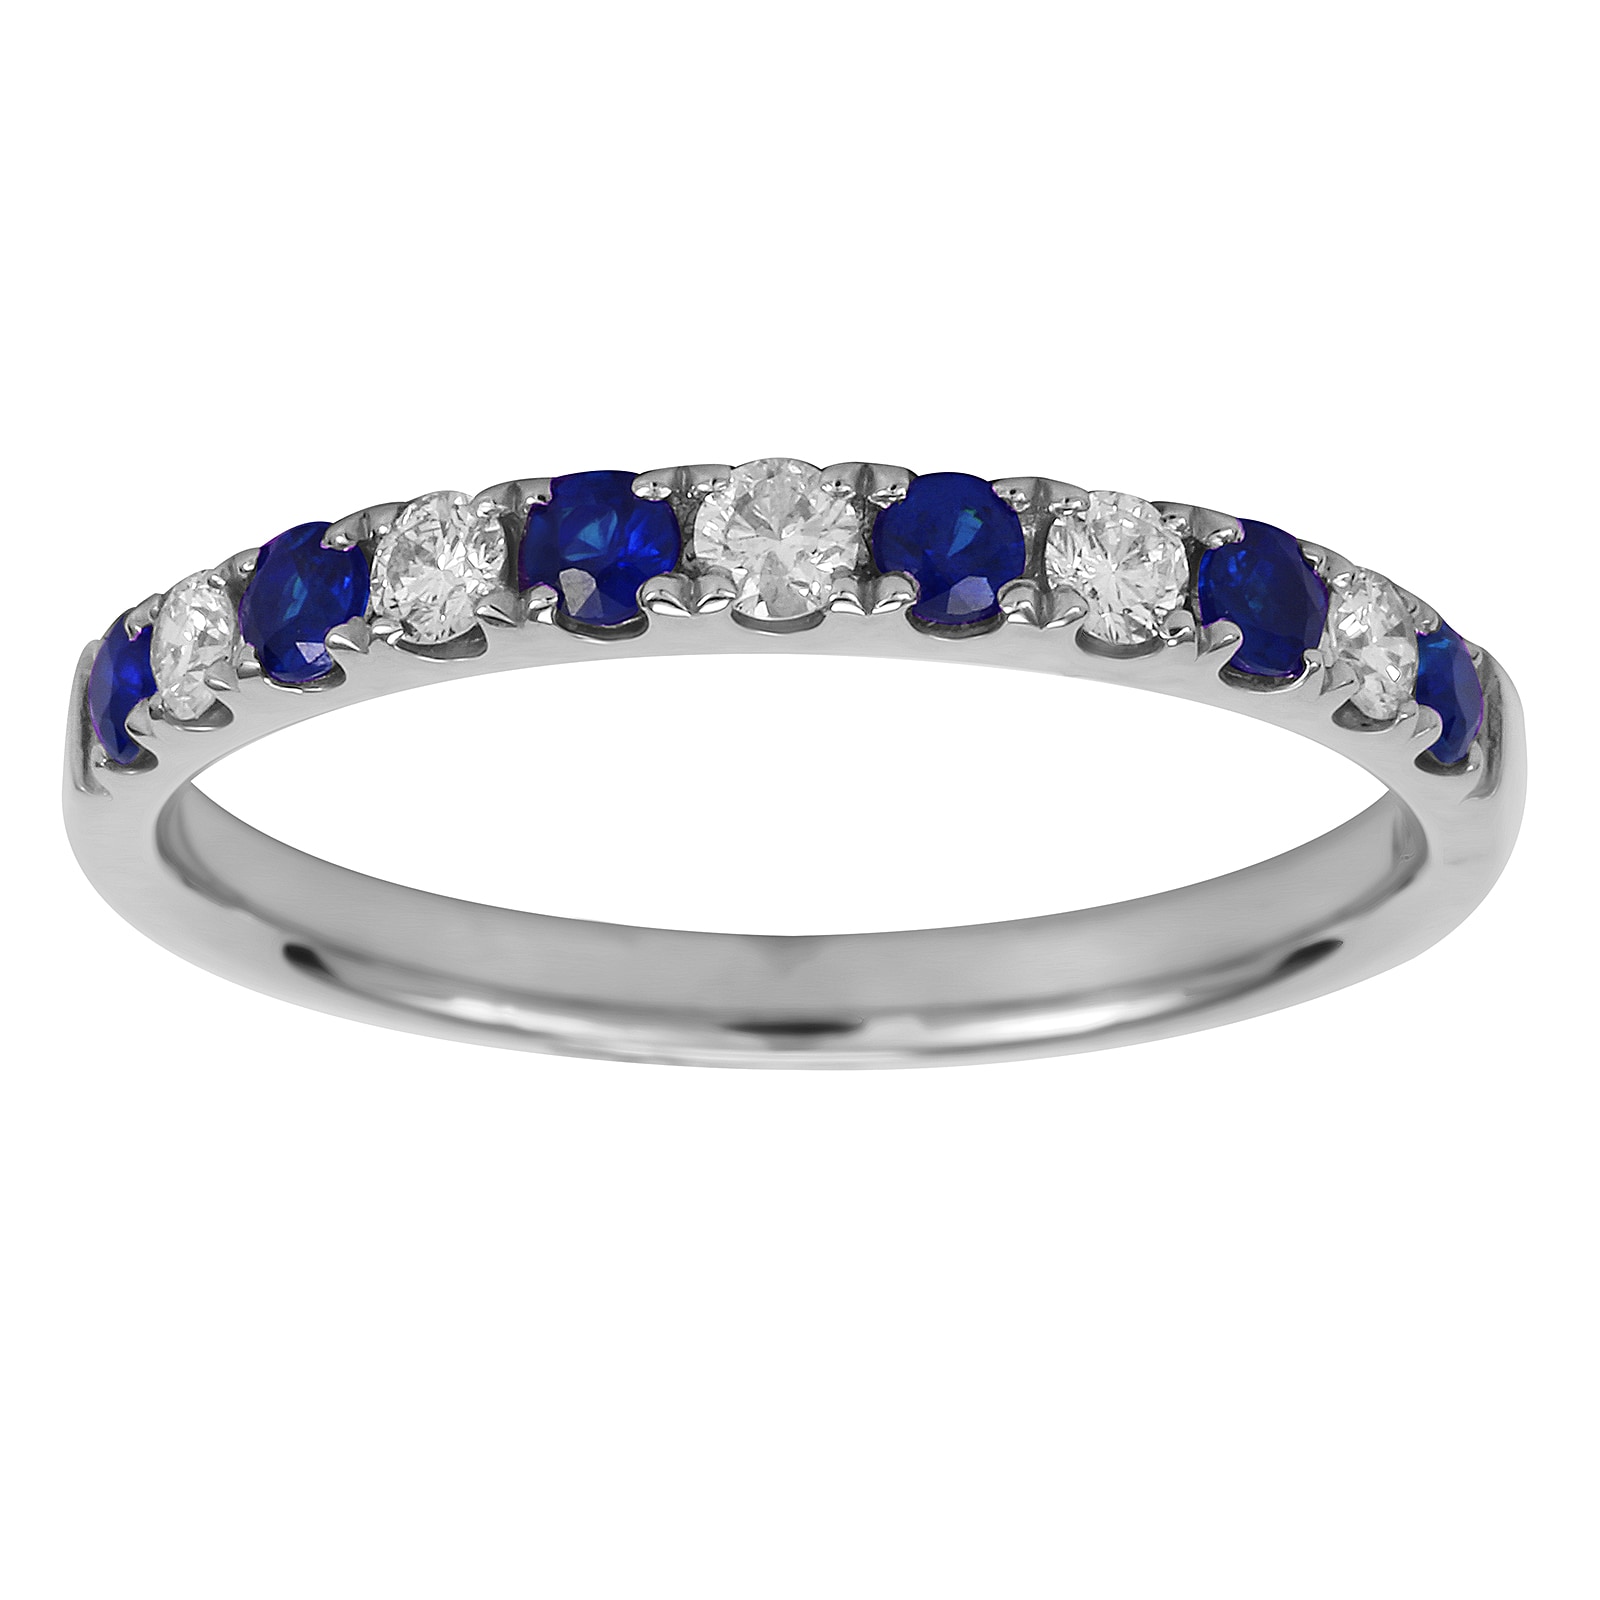 18ct White Gold 0.20ct Diamond & Sapphire Eternity Rings - Ring Size L